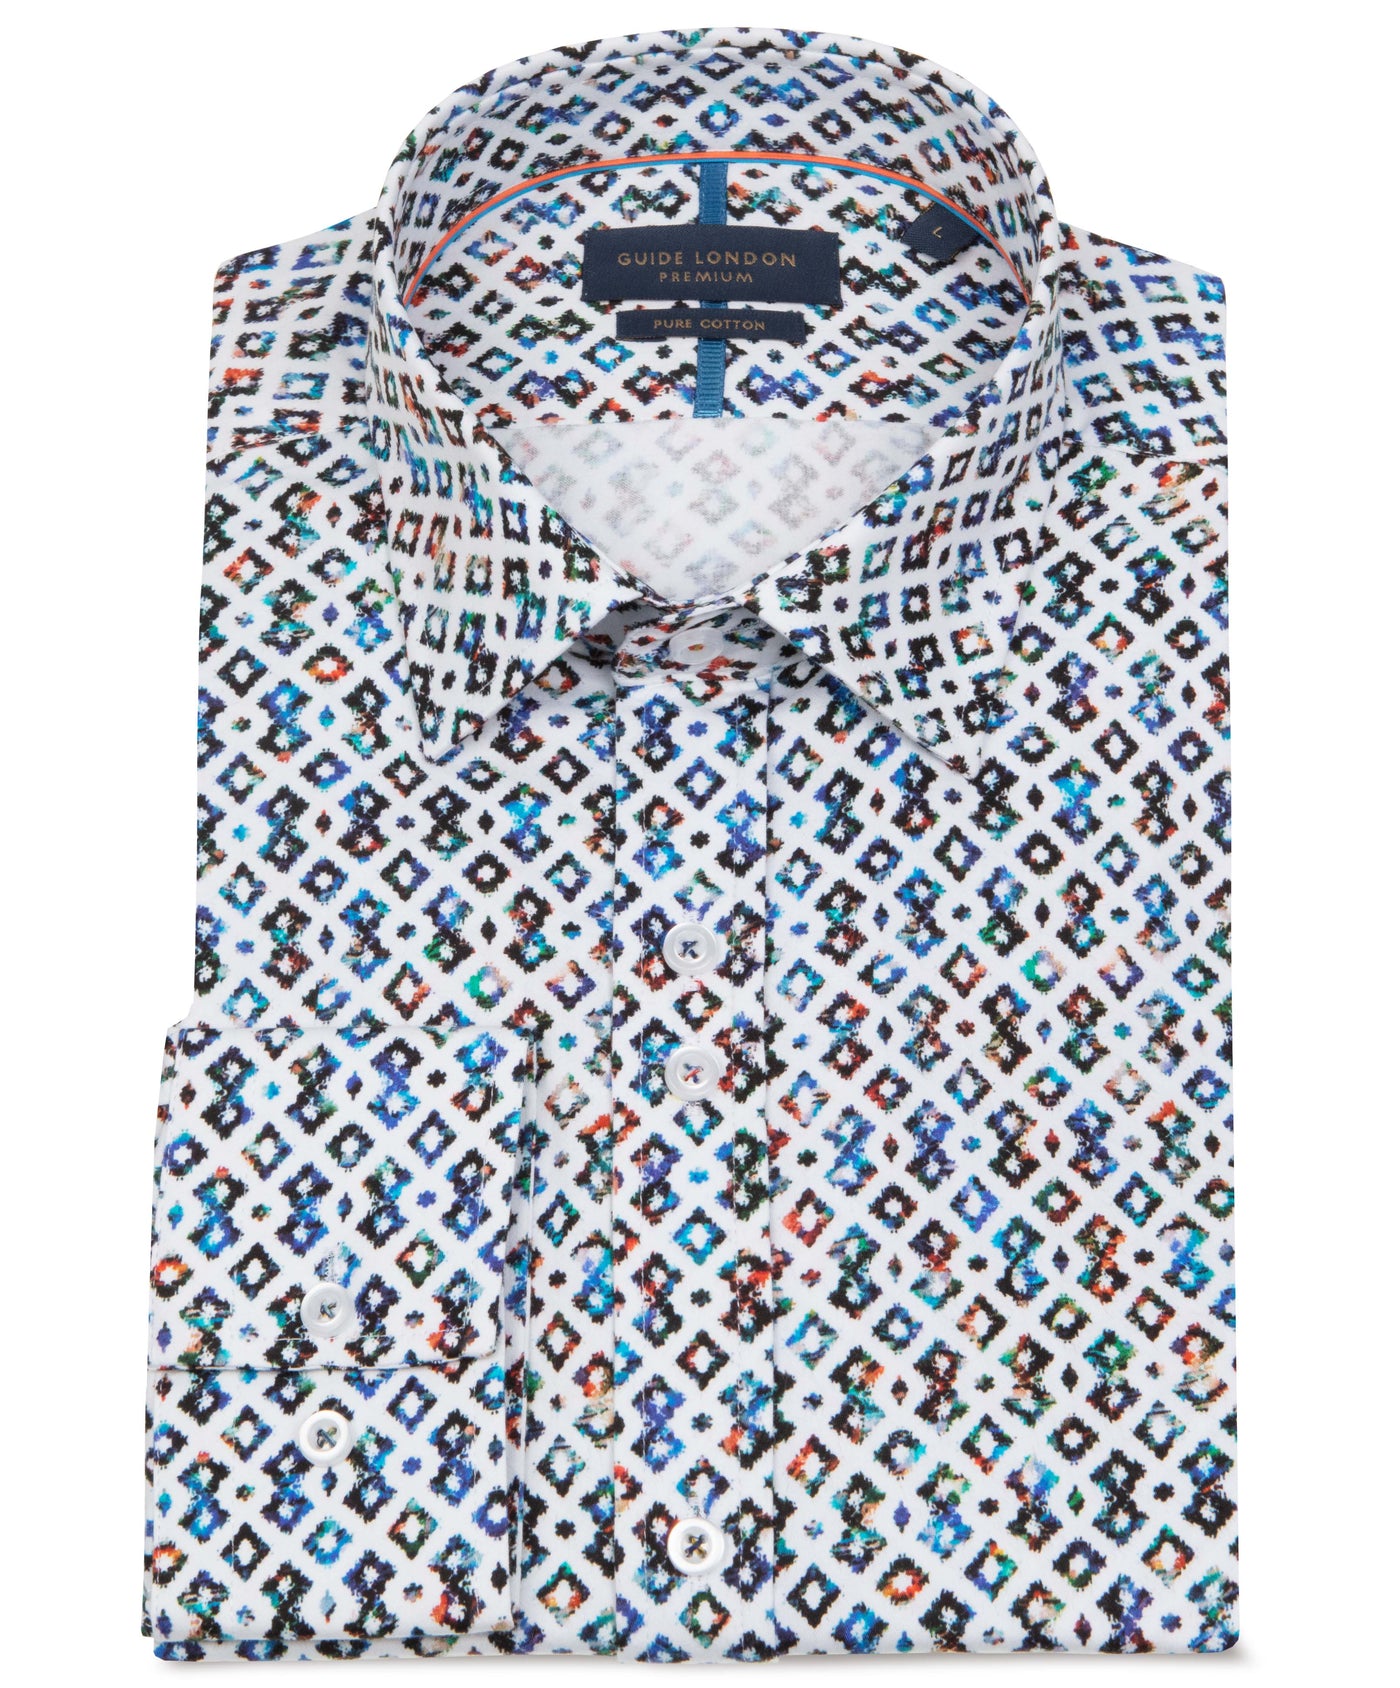 Stand Out in Style: Fun and Vibrant Men's Cotton Geometric Shirt